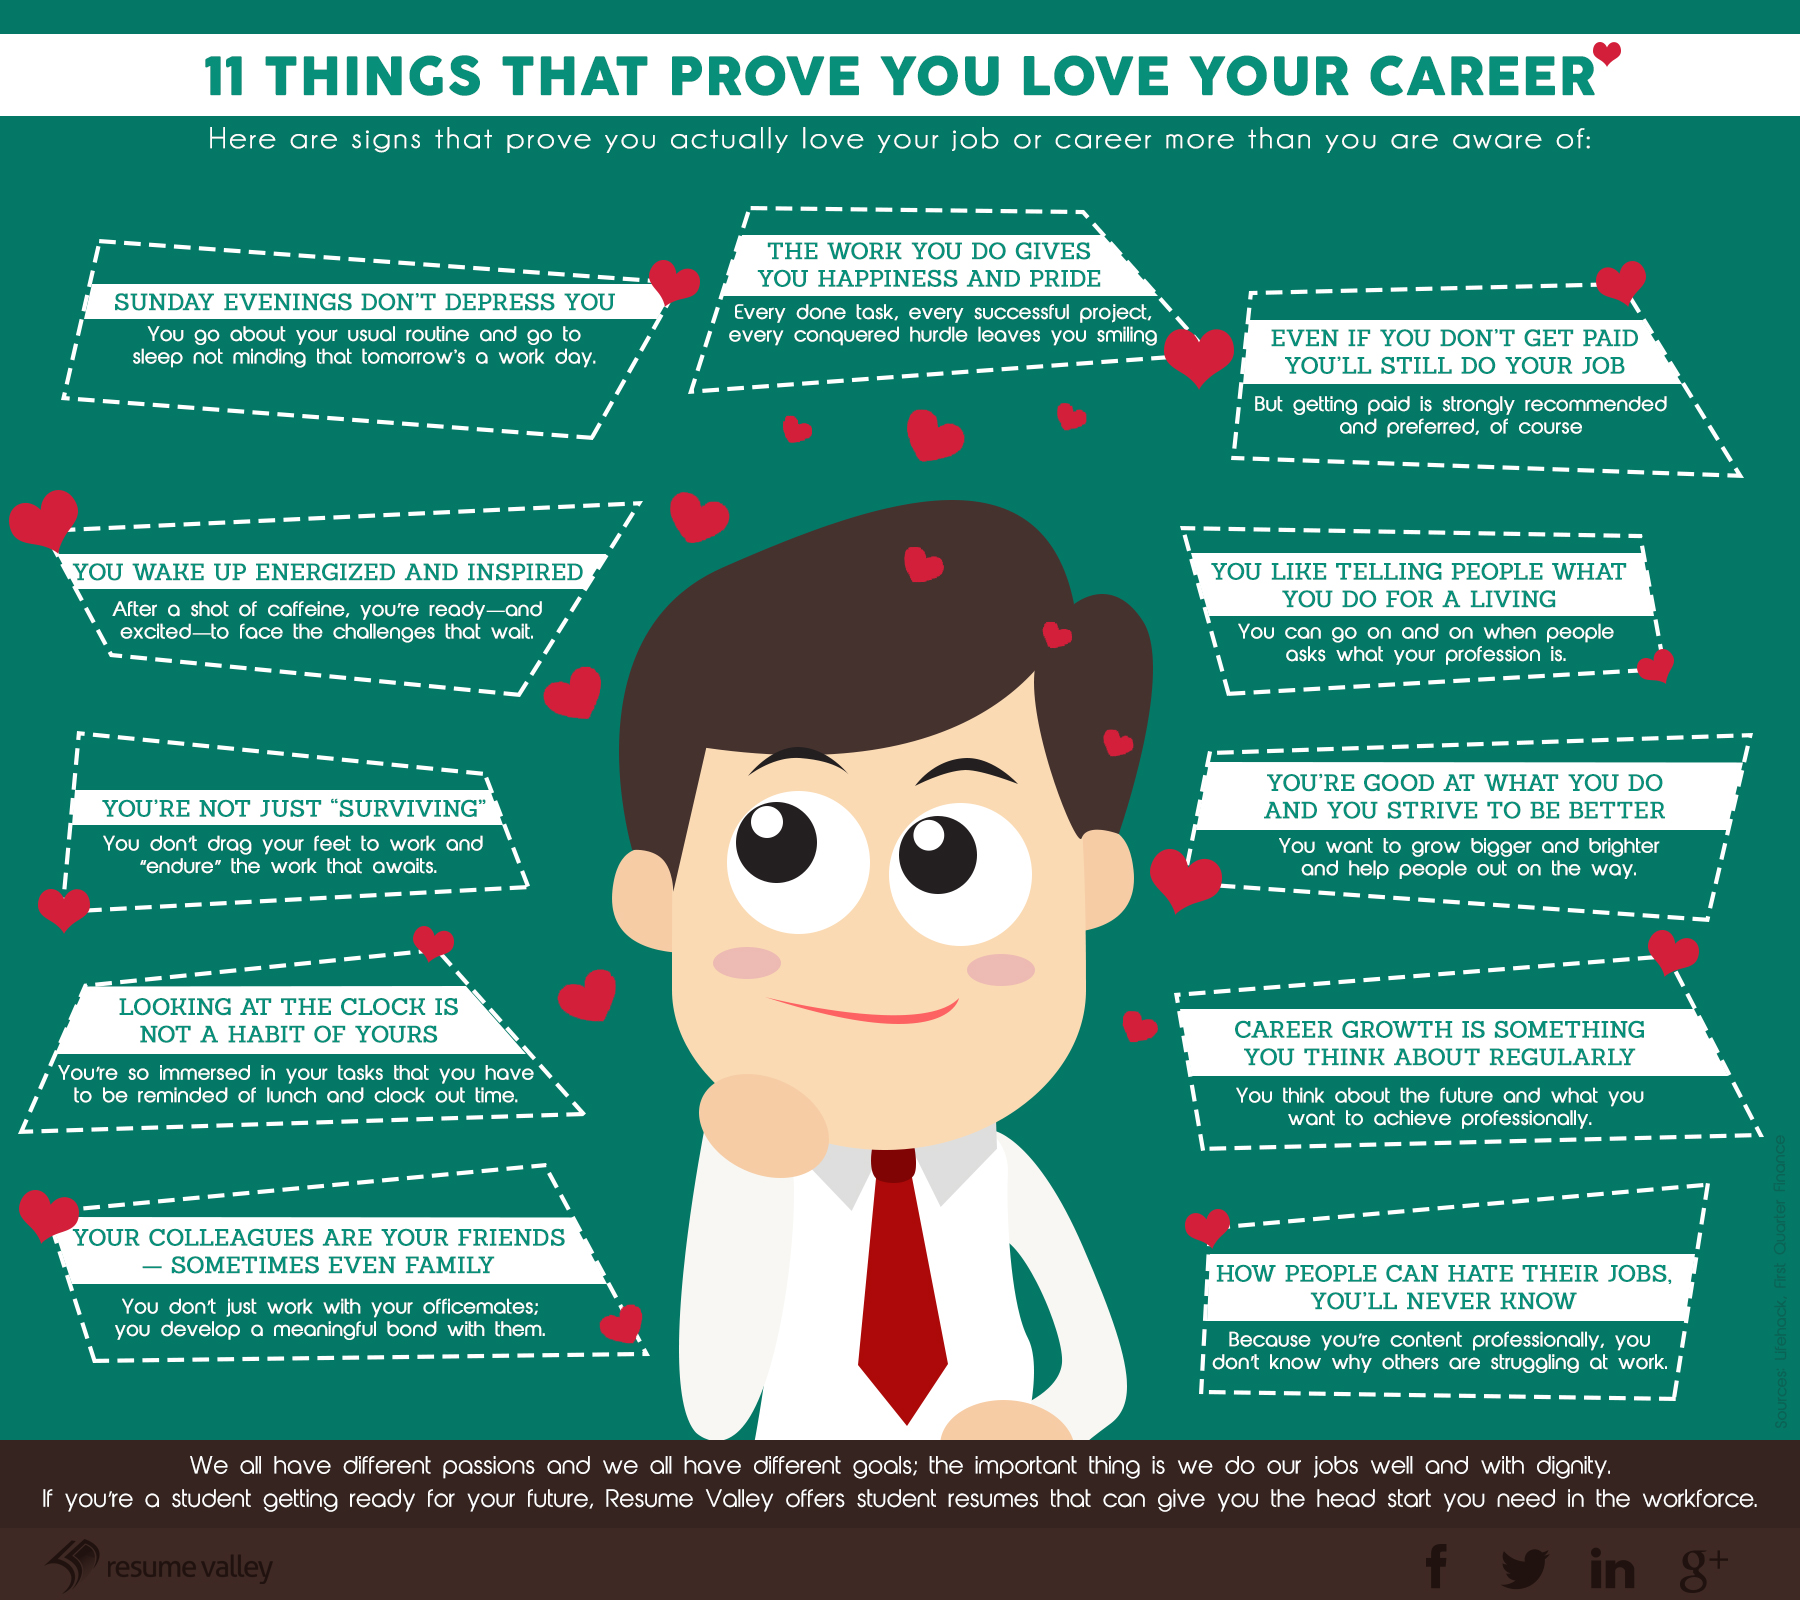 11 Things That Prove You Love Your Career [Infographic]